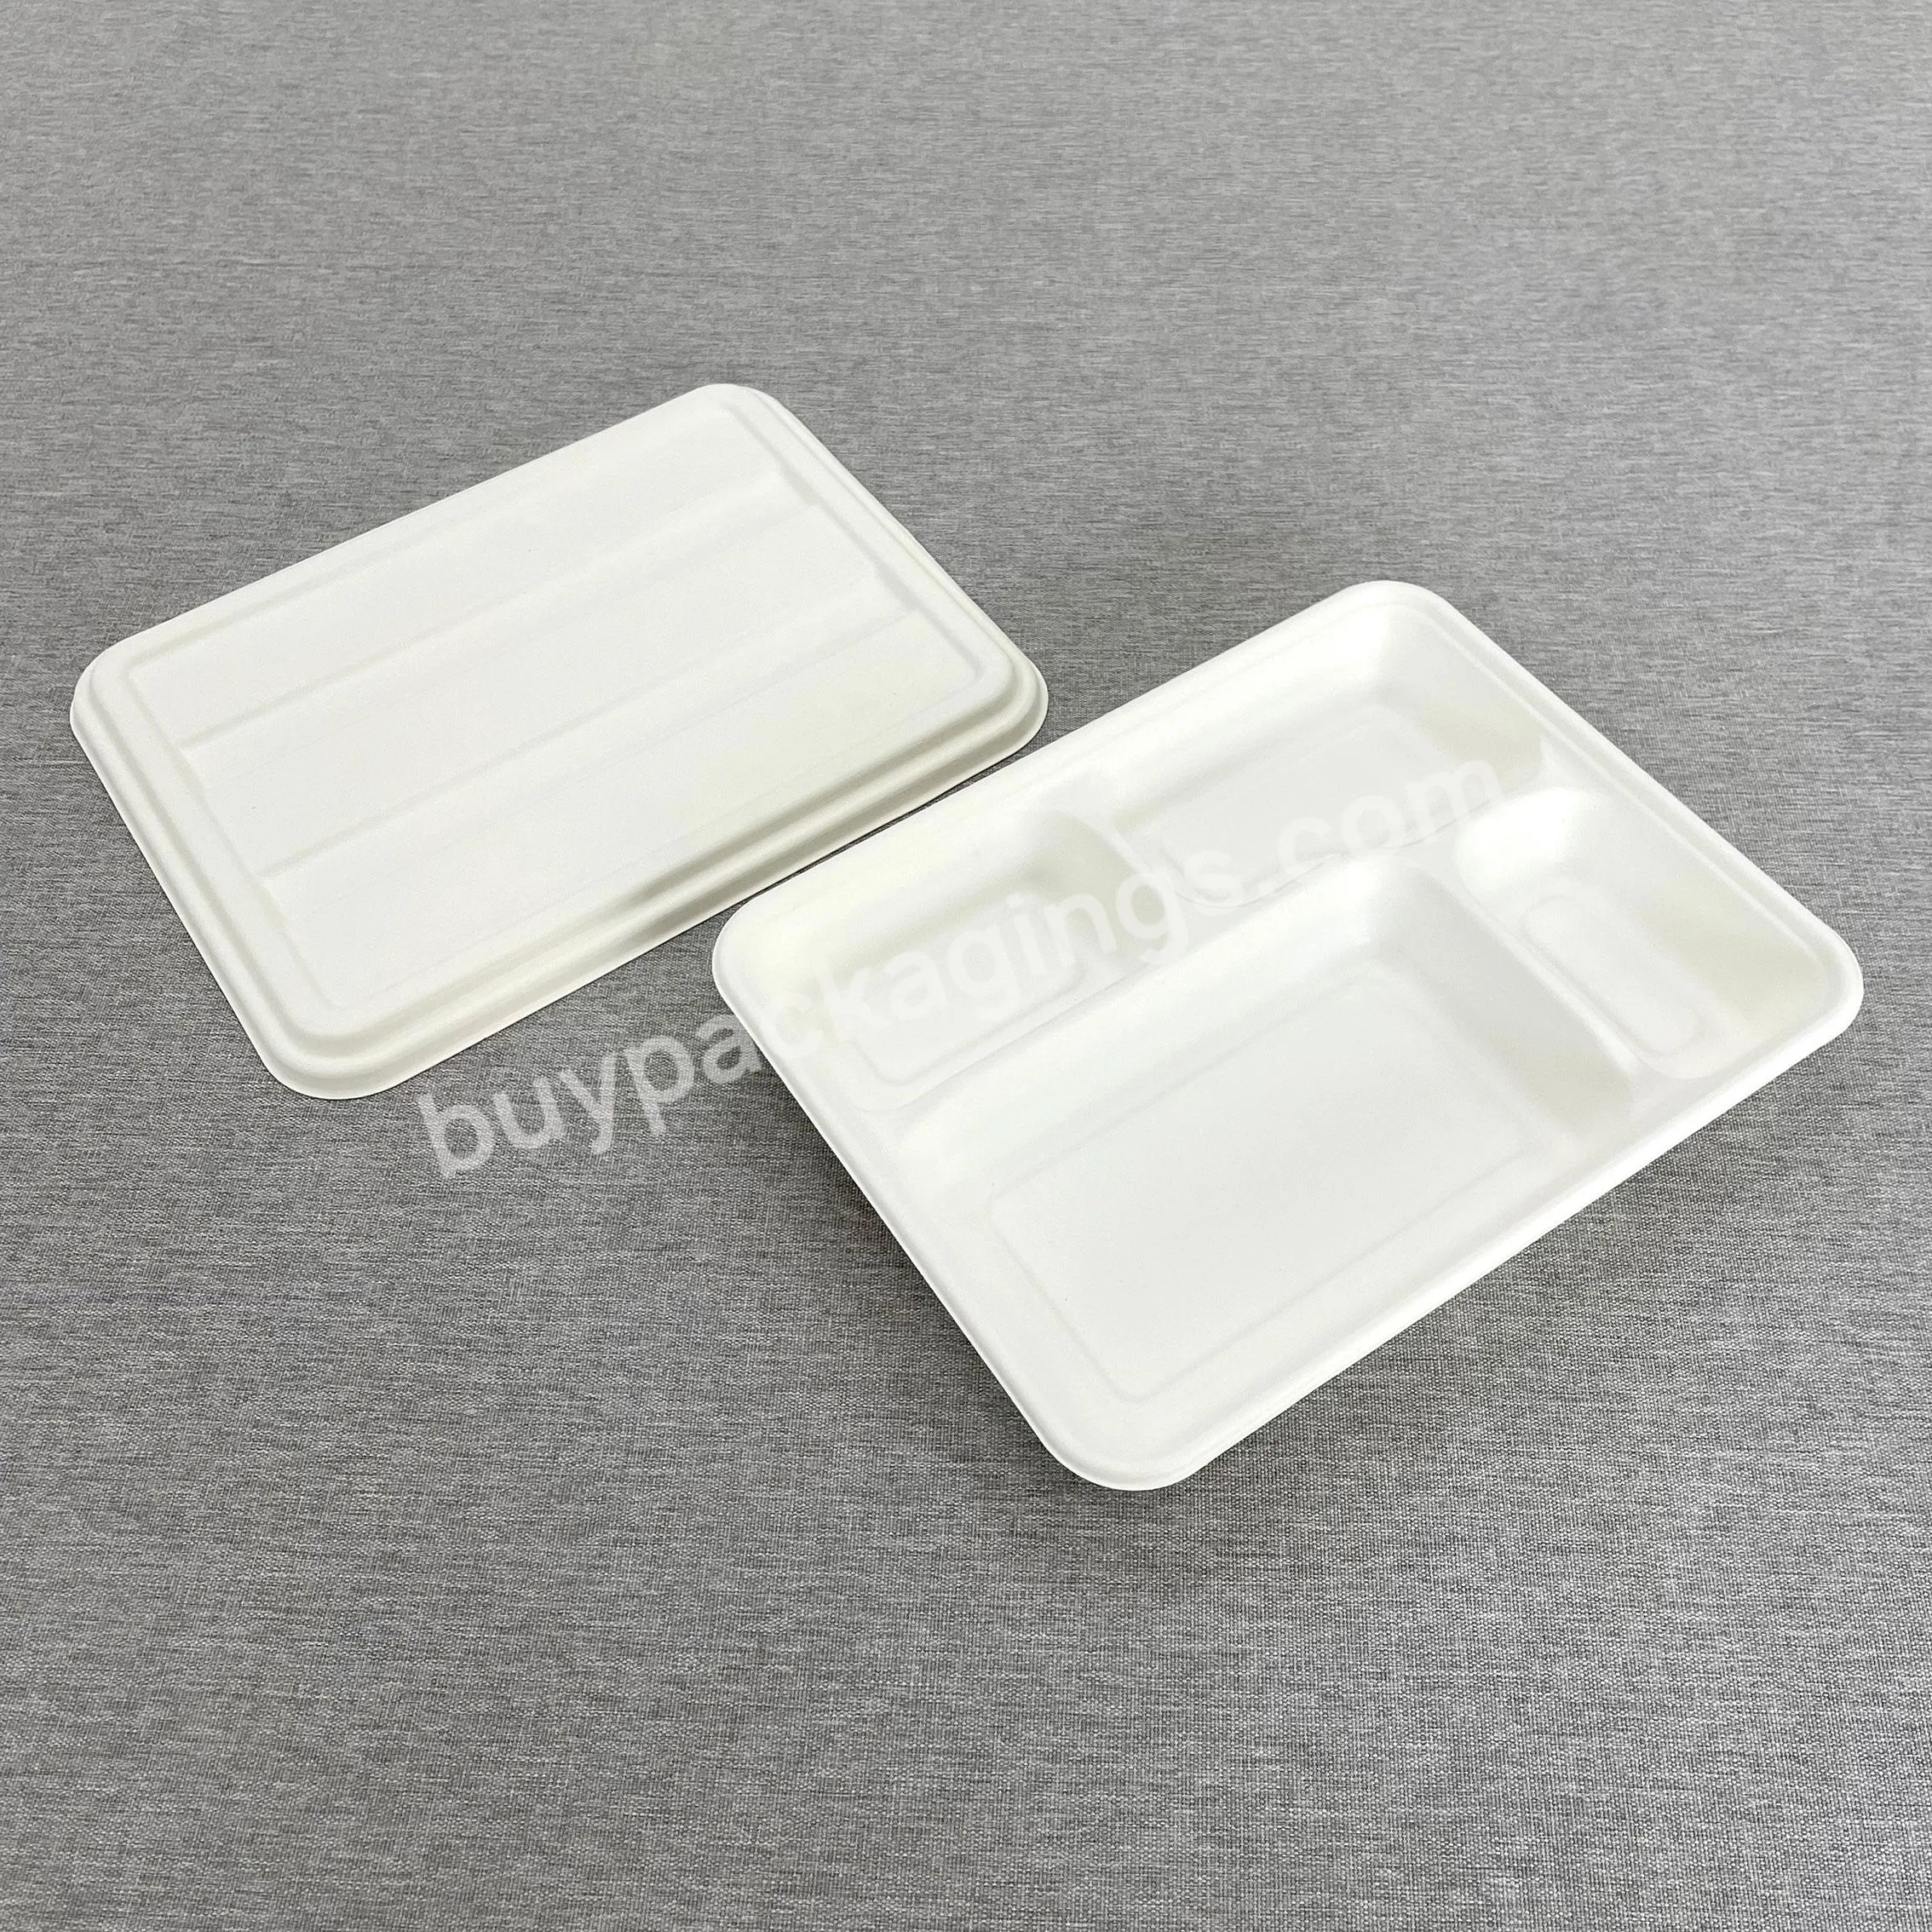 Disposable Cardboard Catering Takeaway Takeout Food Paper Container Box Storage Pack With Lid Packaging - Buy Food Storage Lid,Disposable Food Pack With Lid,Food Paper Box With Lid.